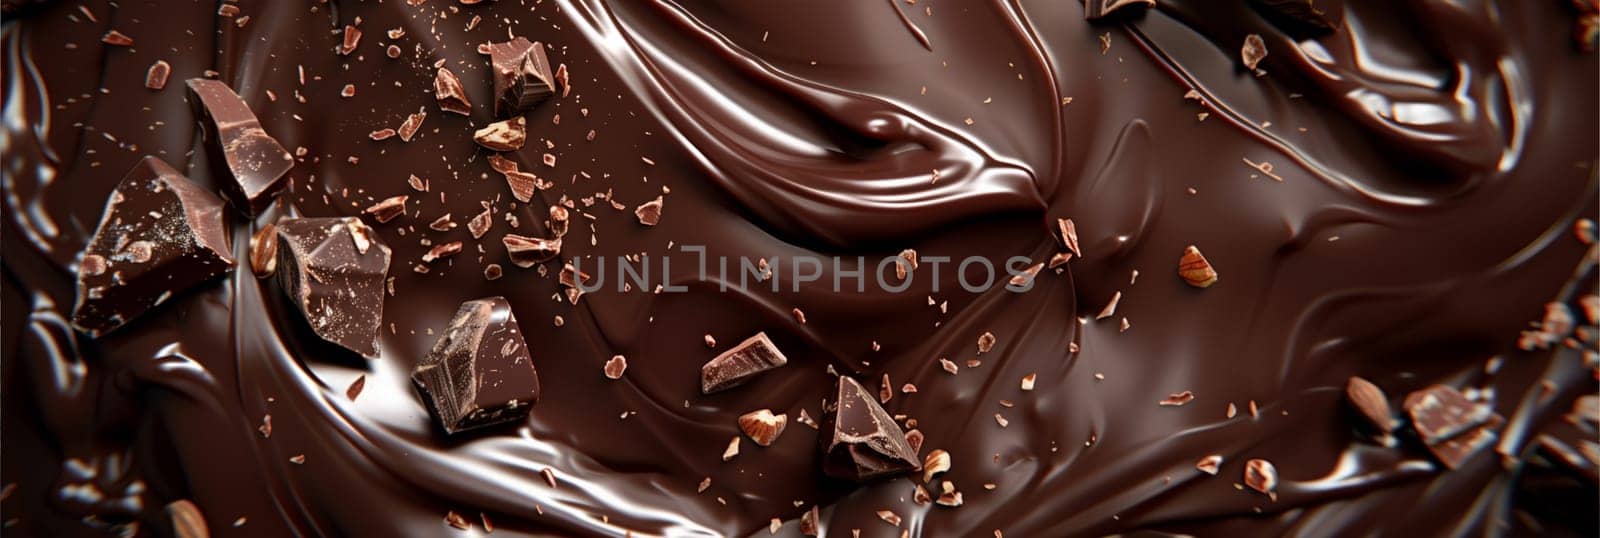 Close Up of Chocolate Sculpture on Table by Sd28DimoN_1976